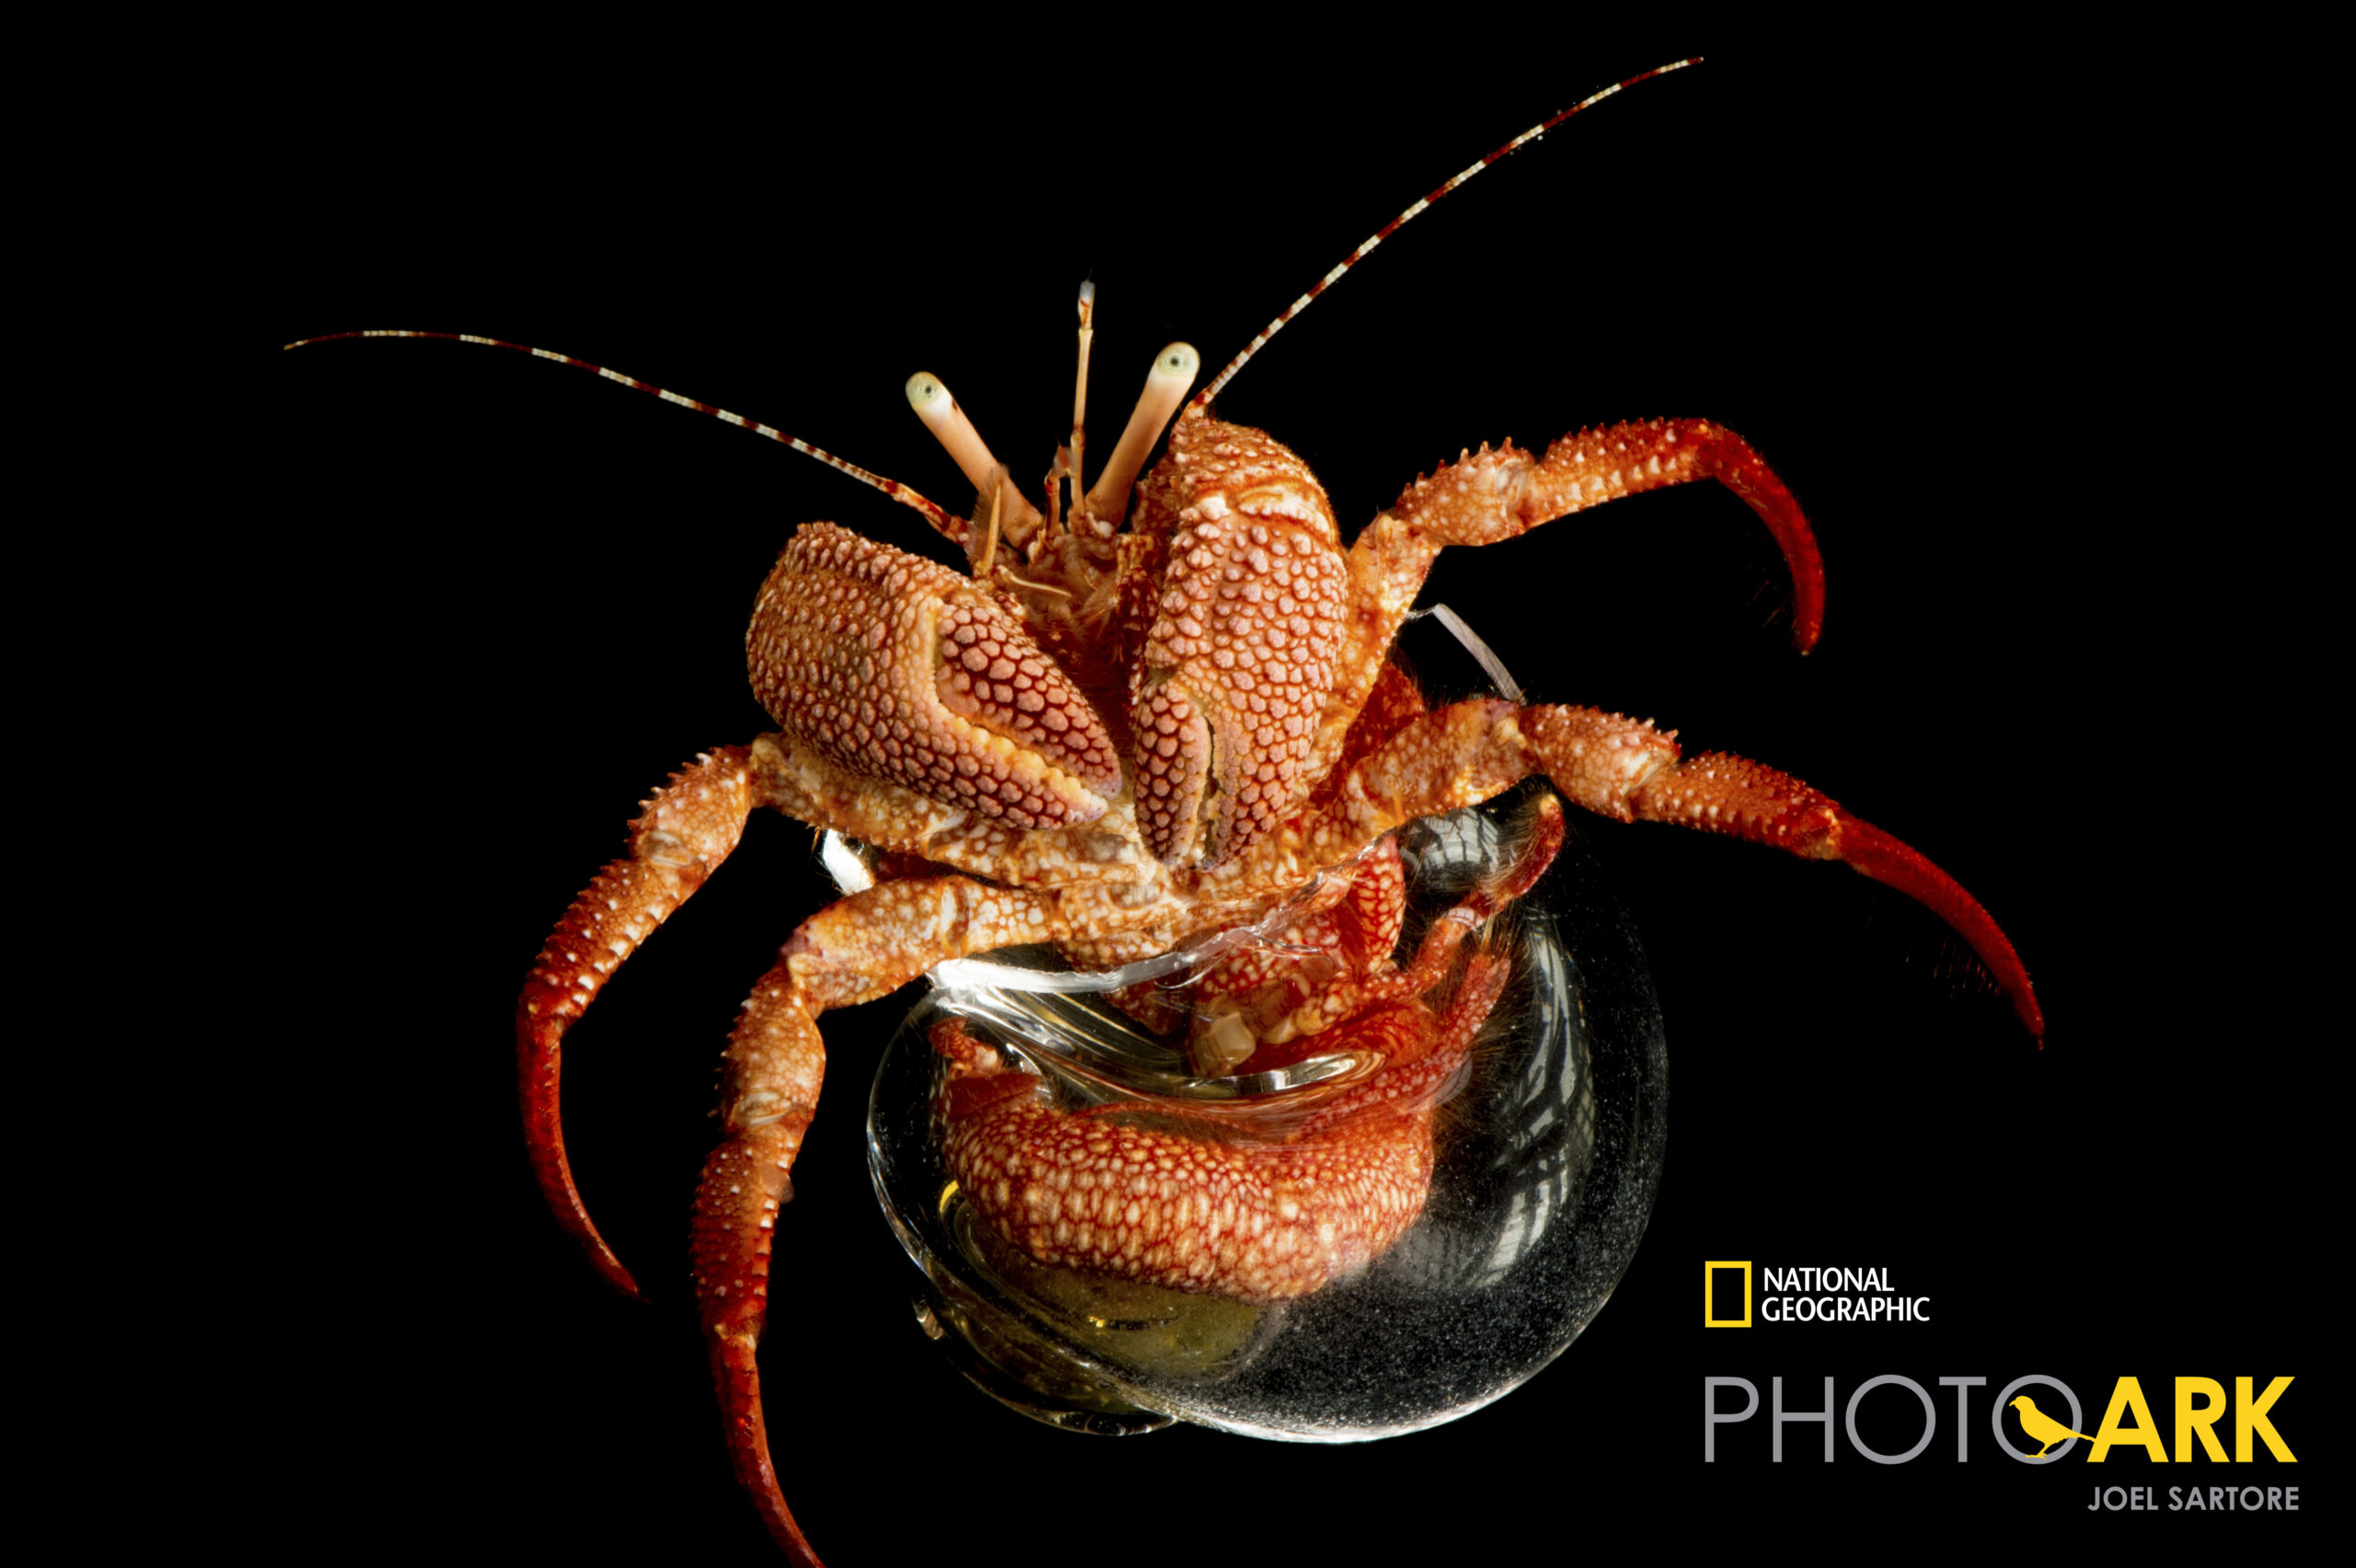 Giant red hermit crab (Petrochirus diogenes) in a manade glass shell at Gulf Specimen in Panacea, FL.